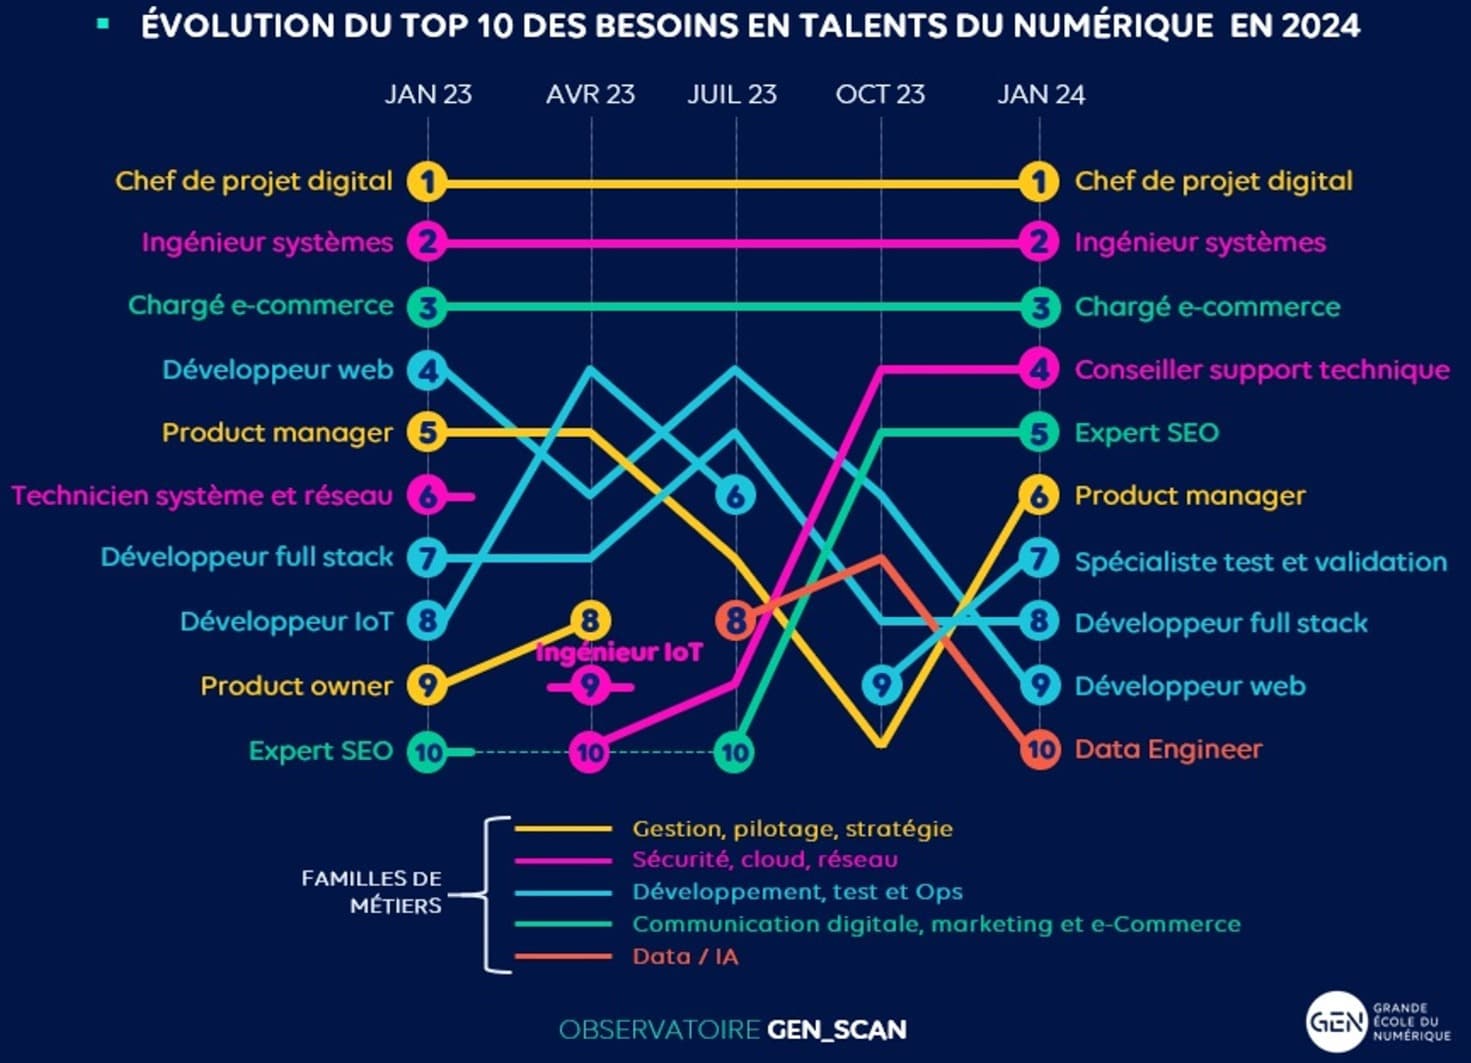 Evolution of the top 10 digital talent needs since January 2023